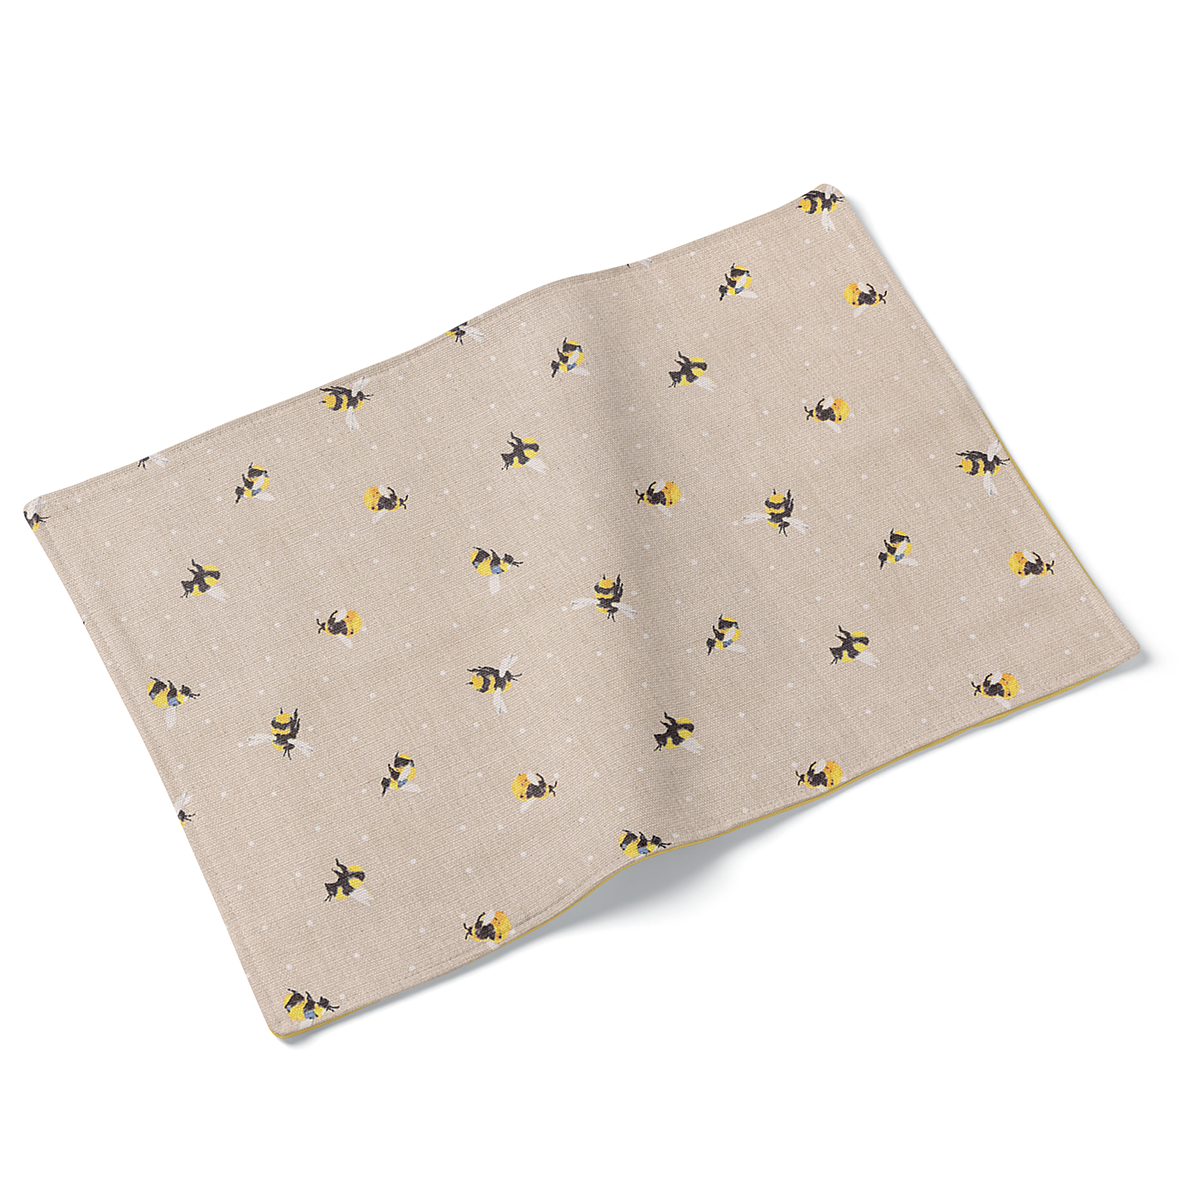 Set of 4 Bee Design Fabric Placemats